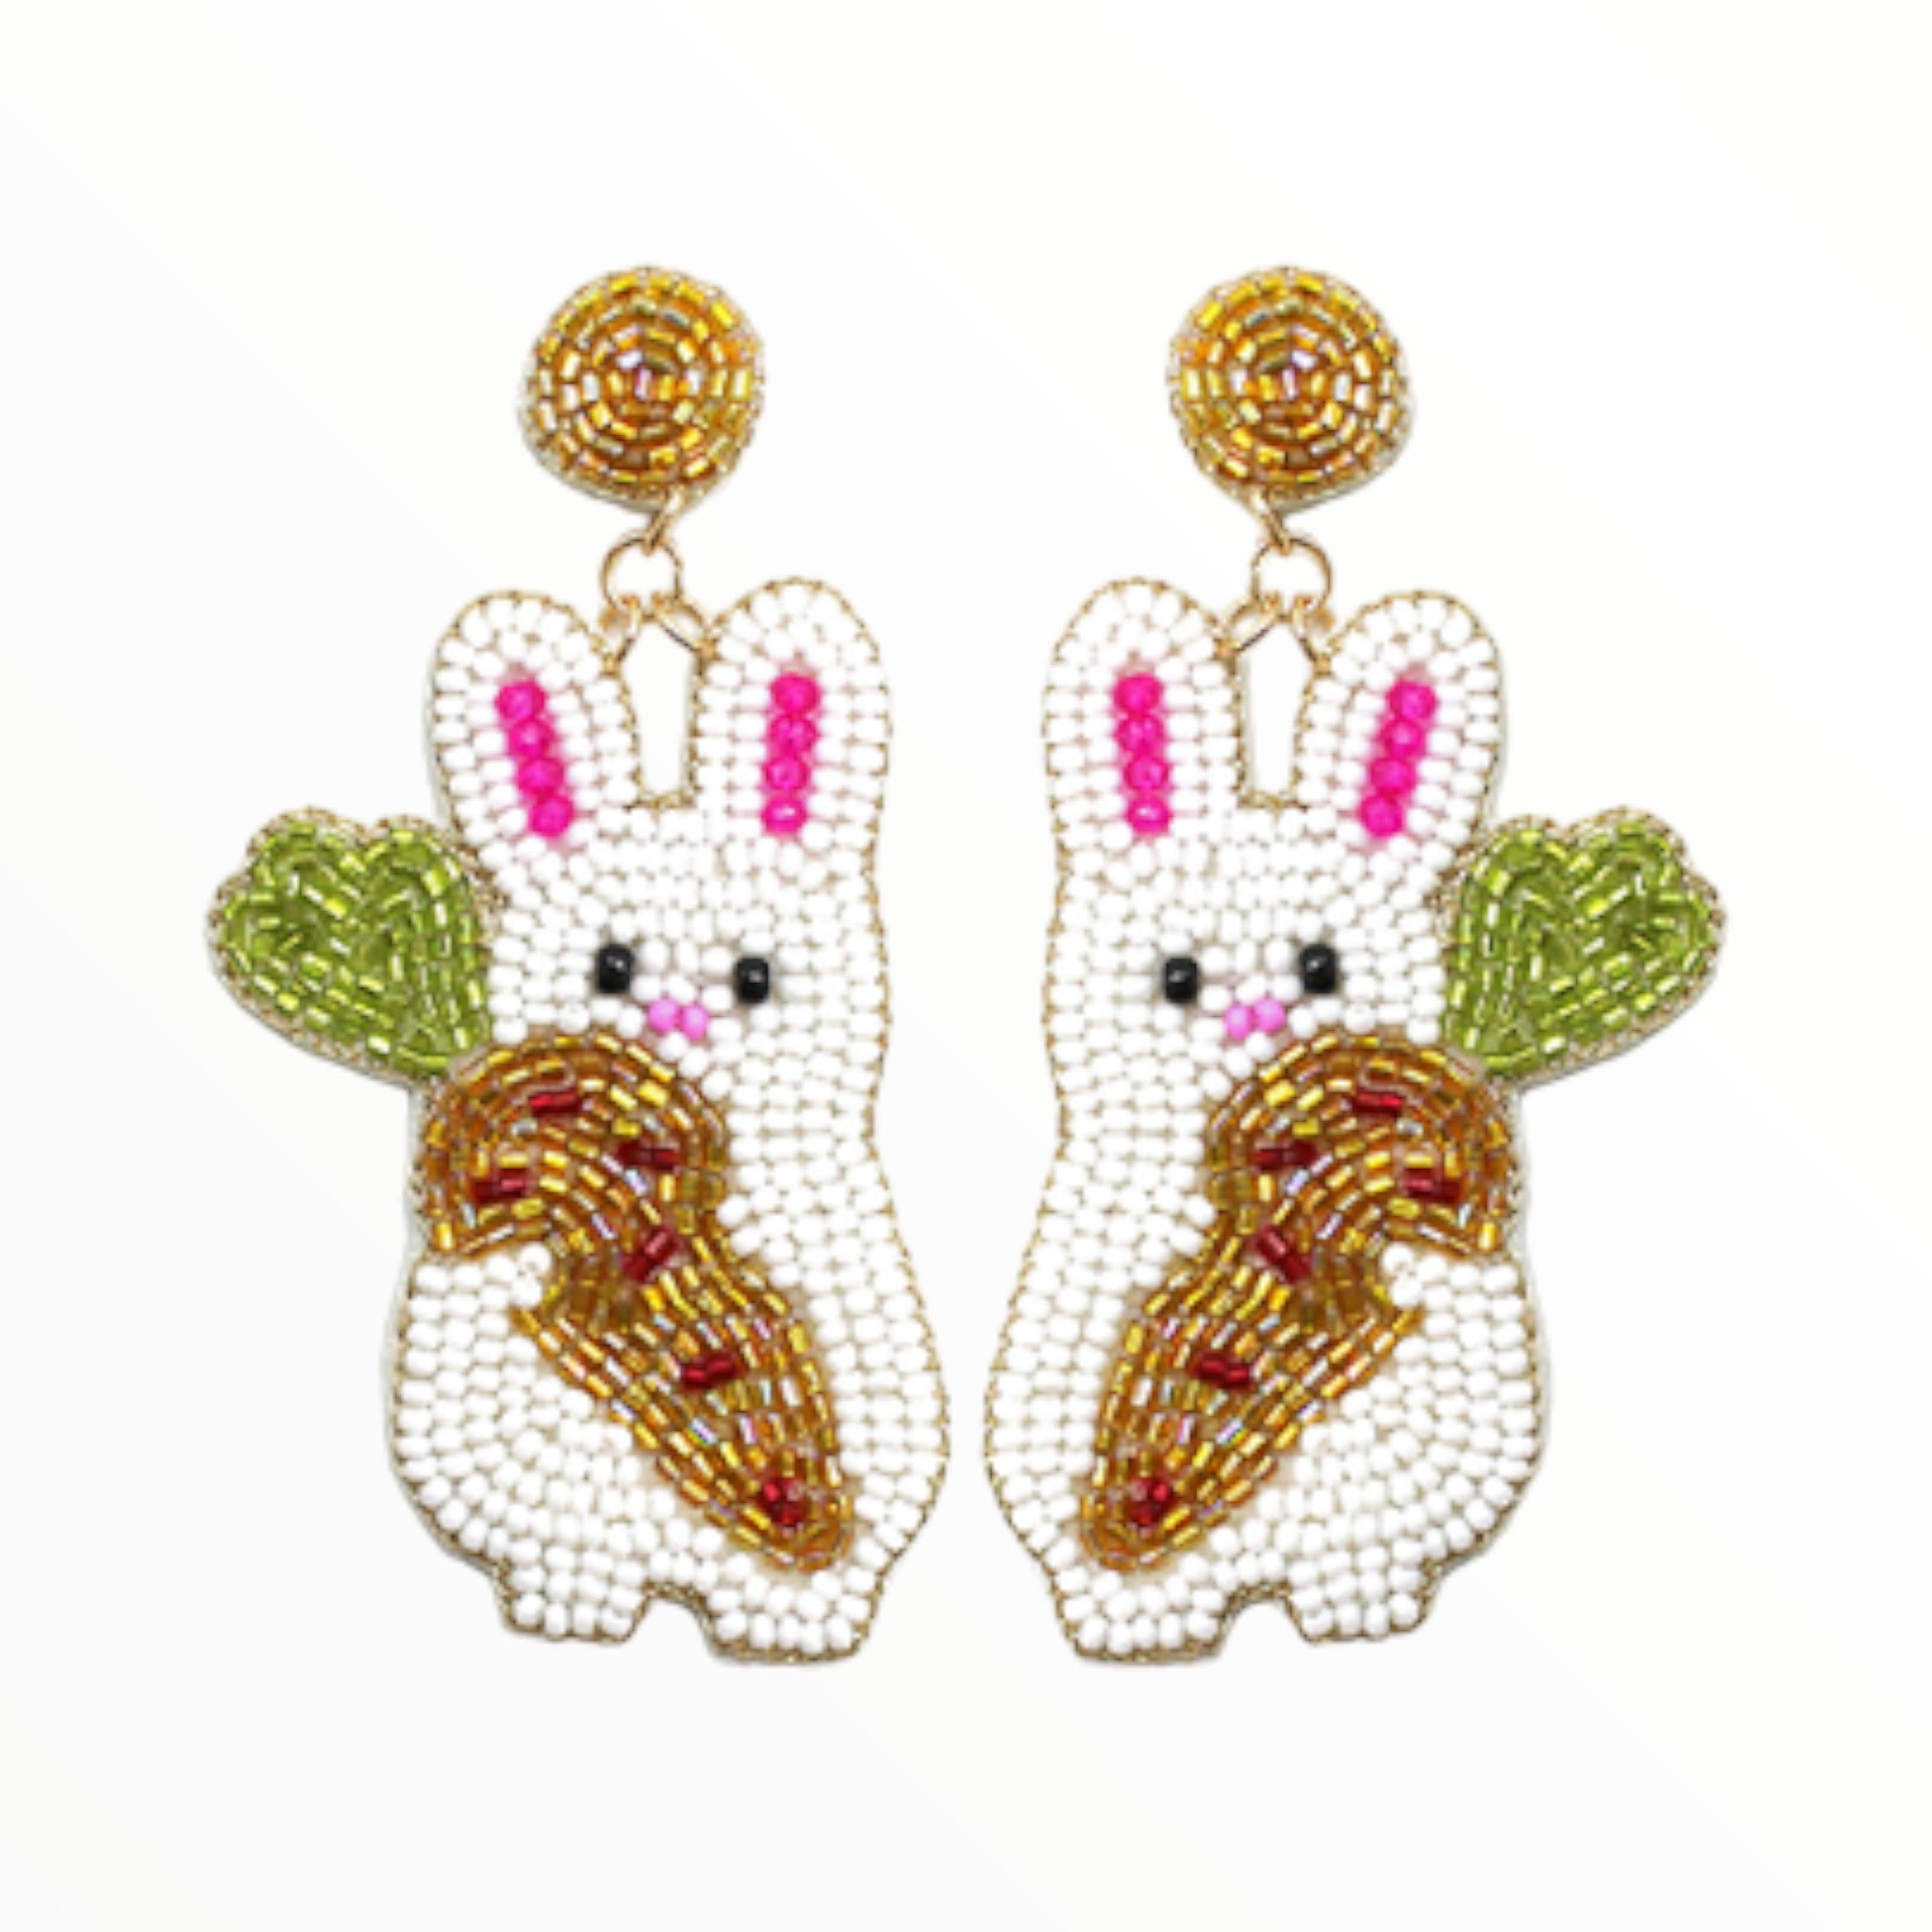 Easter Bunny & Carrot Beaded Earrings-Earrings-LouisGeorge Boutique-LouisGeorge Boutique, Women’s Fashion Boutique Located in Trussville, Alabama